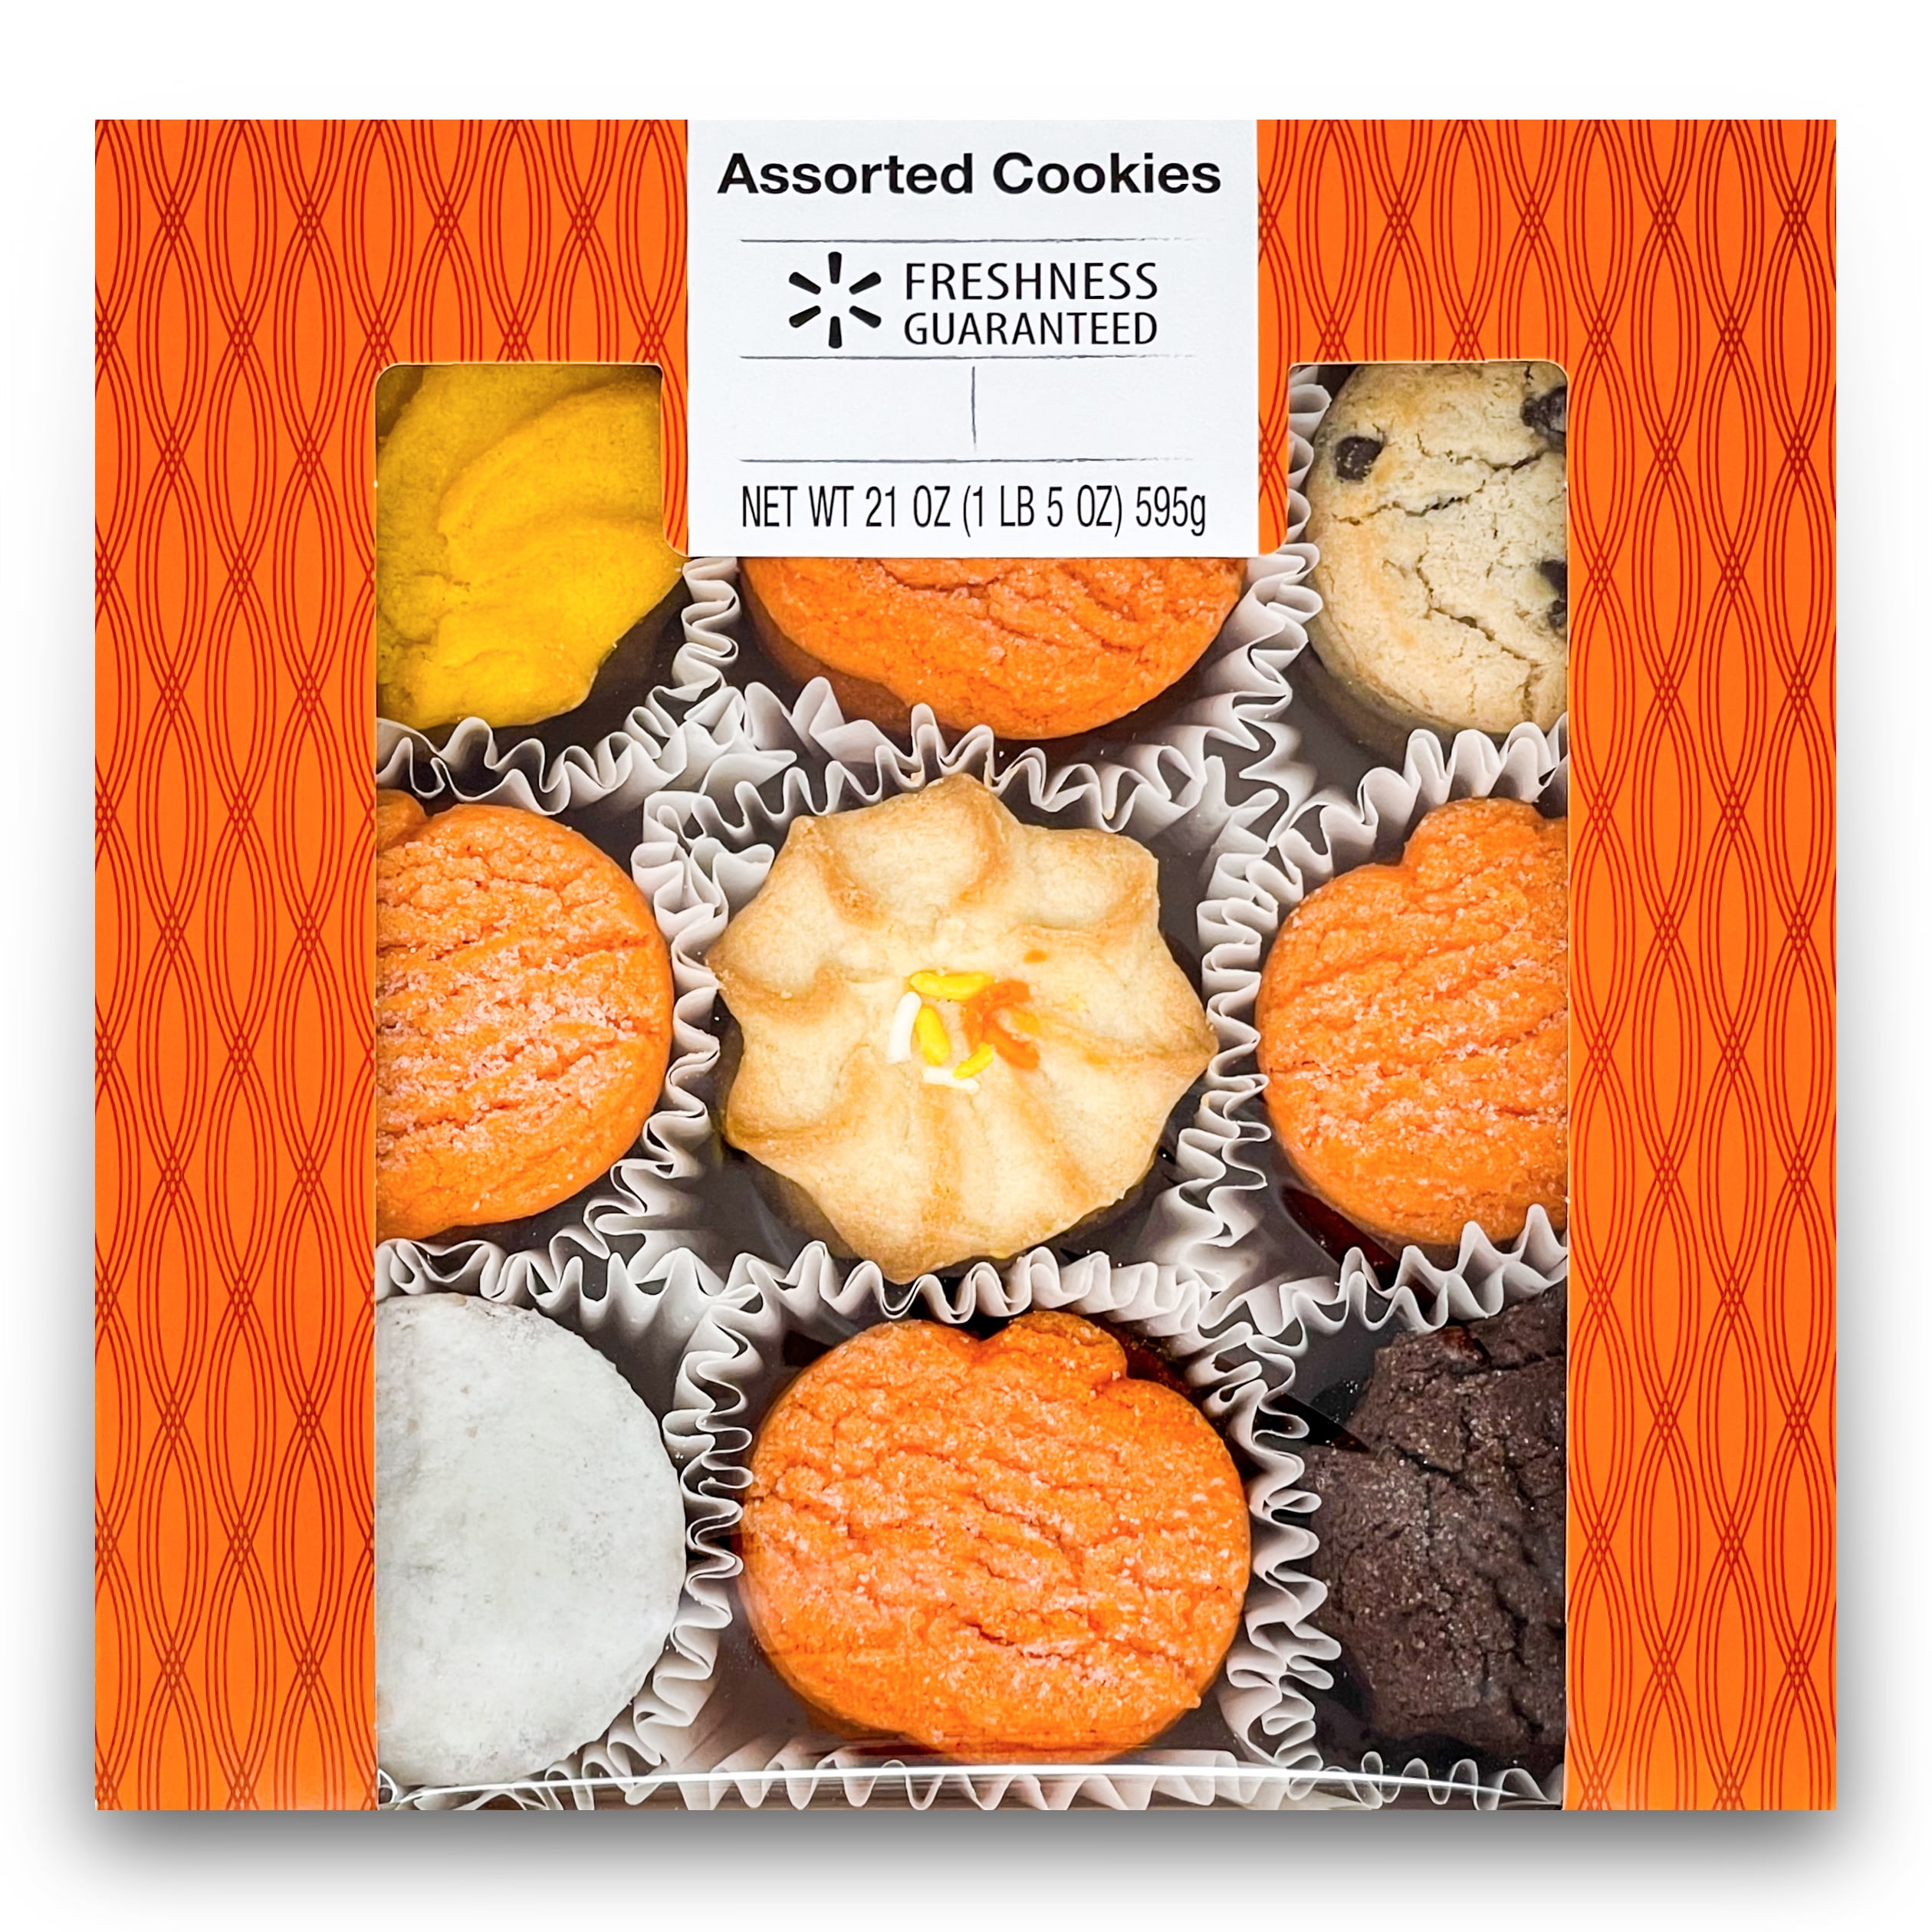 Freshness Guaranteed Assorted Harvest Cookies, 21 oz, 45 Count